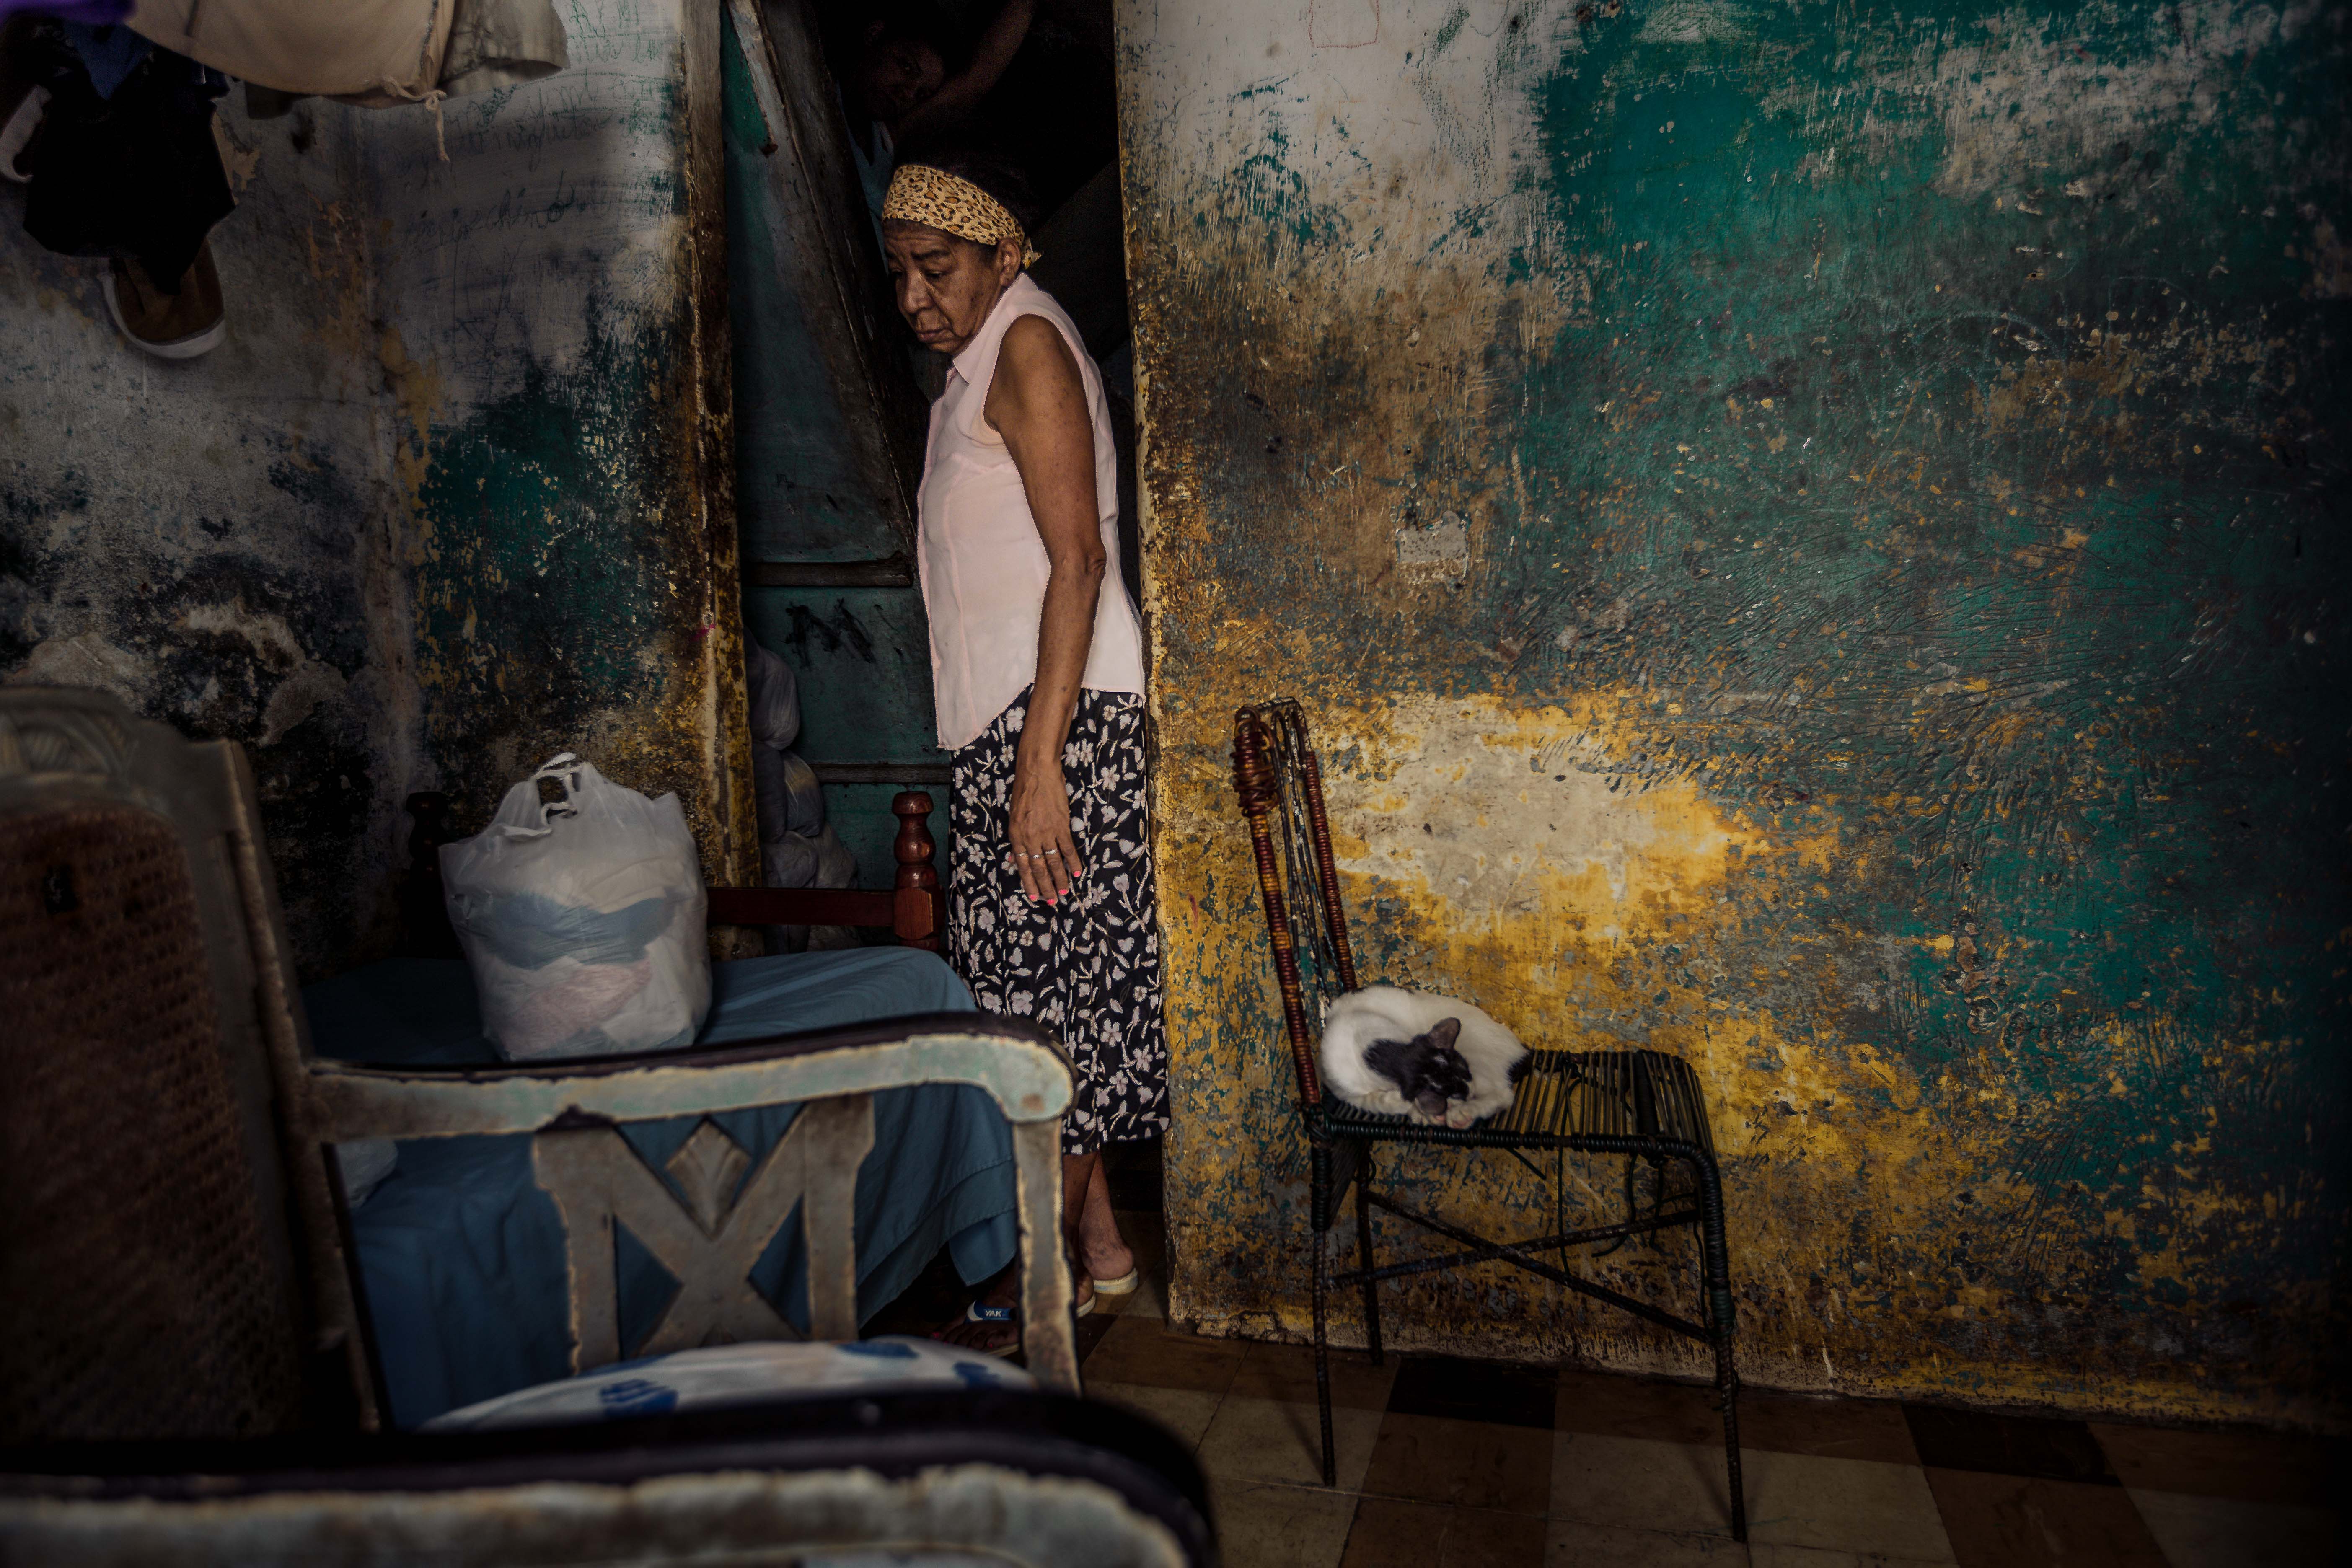 Time stands still here in Cuba